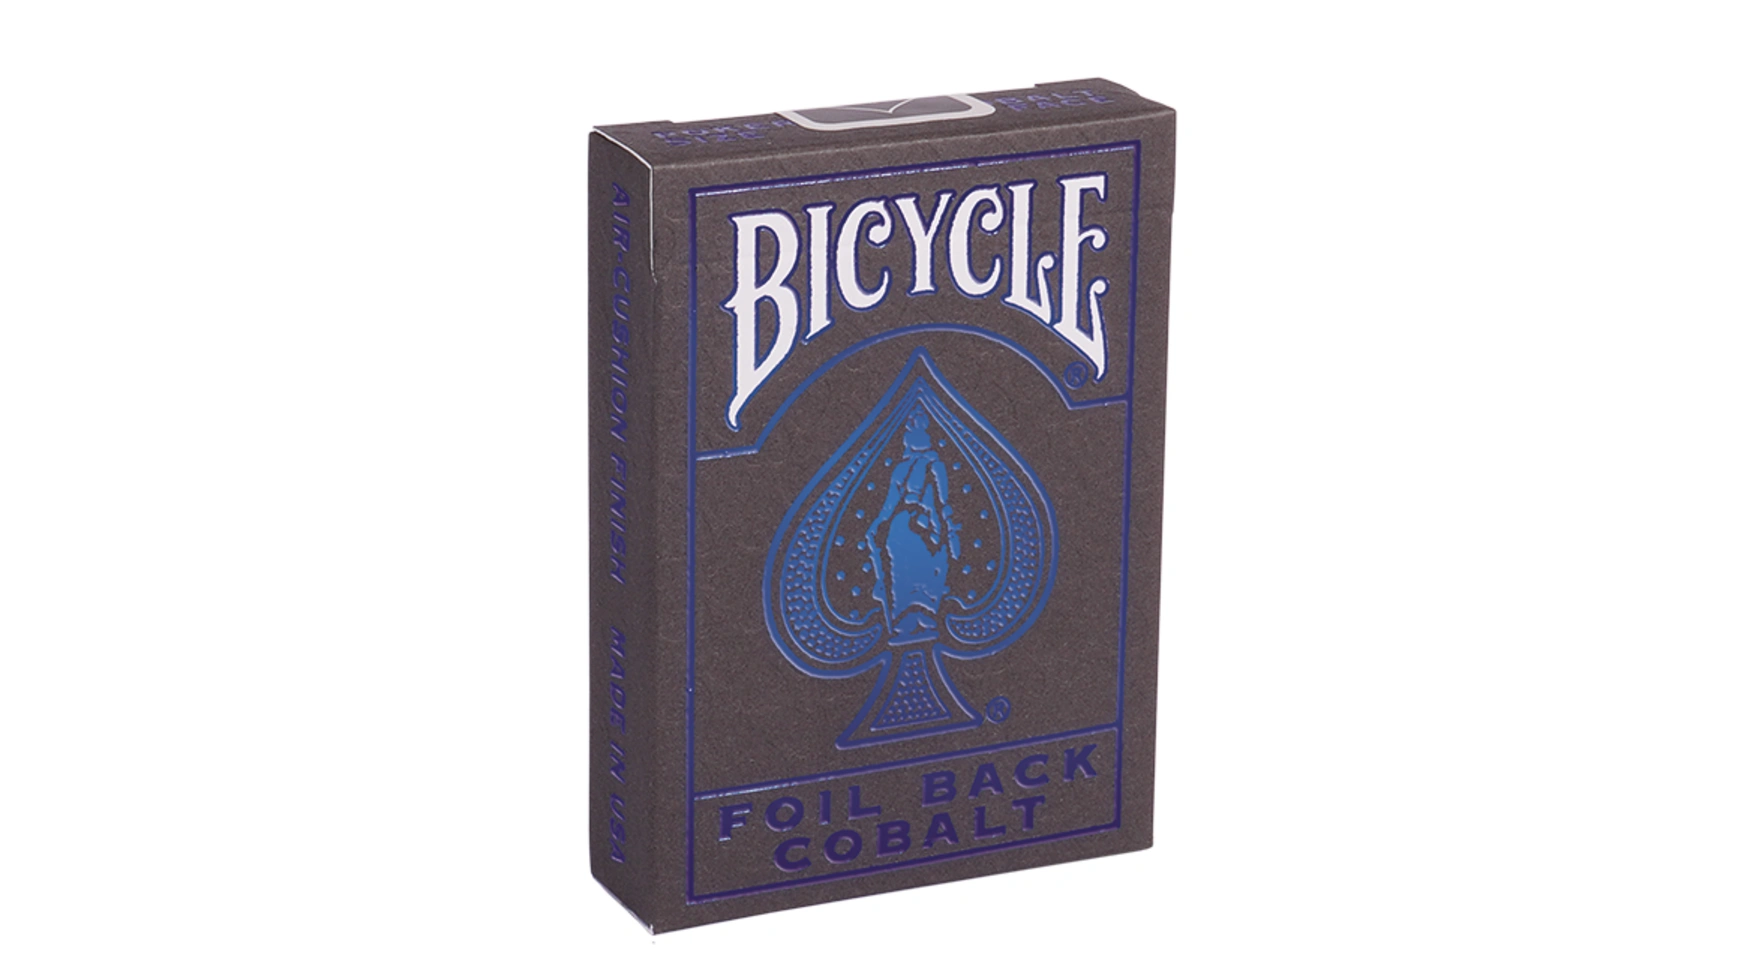 Bicycle игральные карты Metalluxe Blue карты bicycle double face red blue